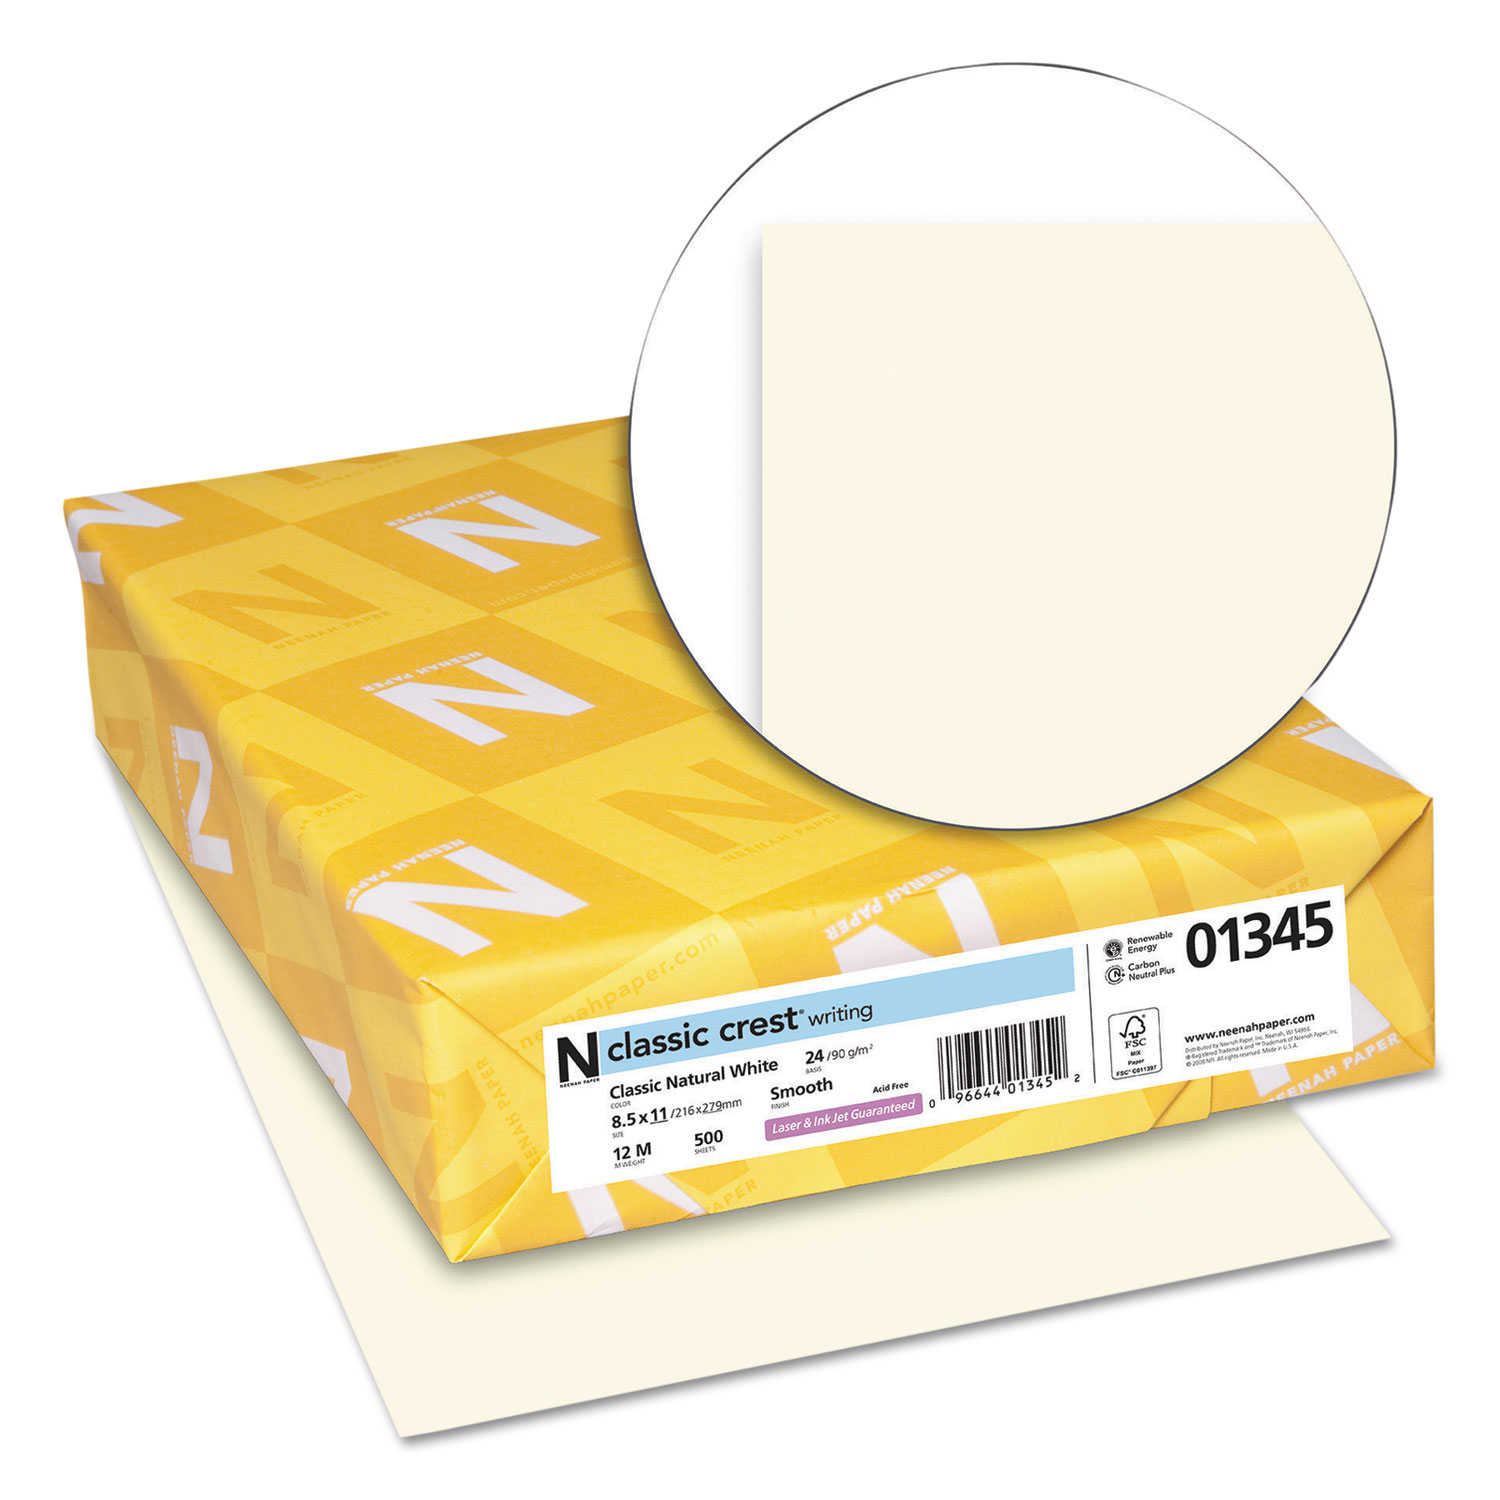 CLASSIC CREST Writing Paper, 24lb, 8 1/2 x 11, Natural White, 500 Sheets